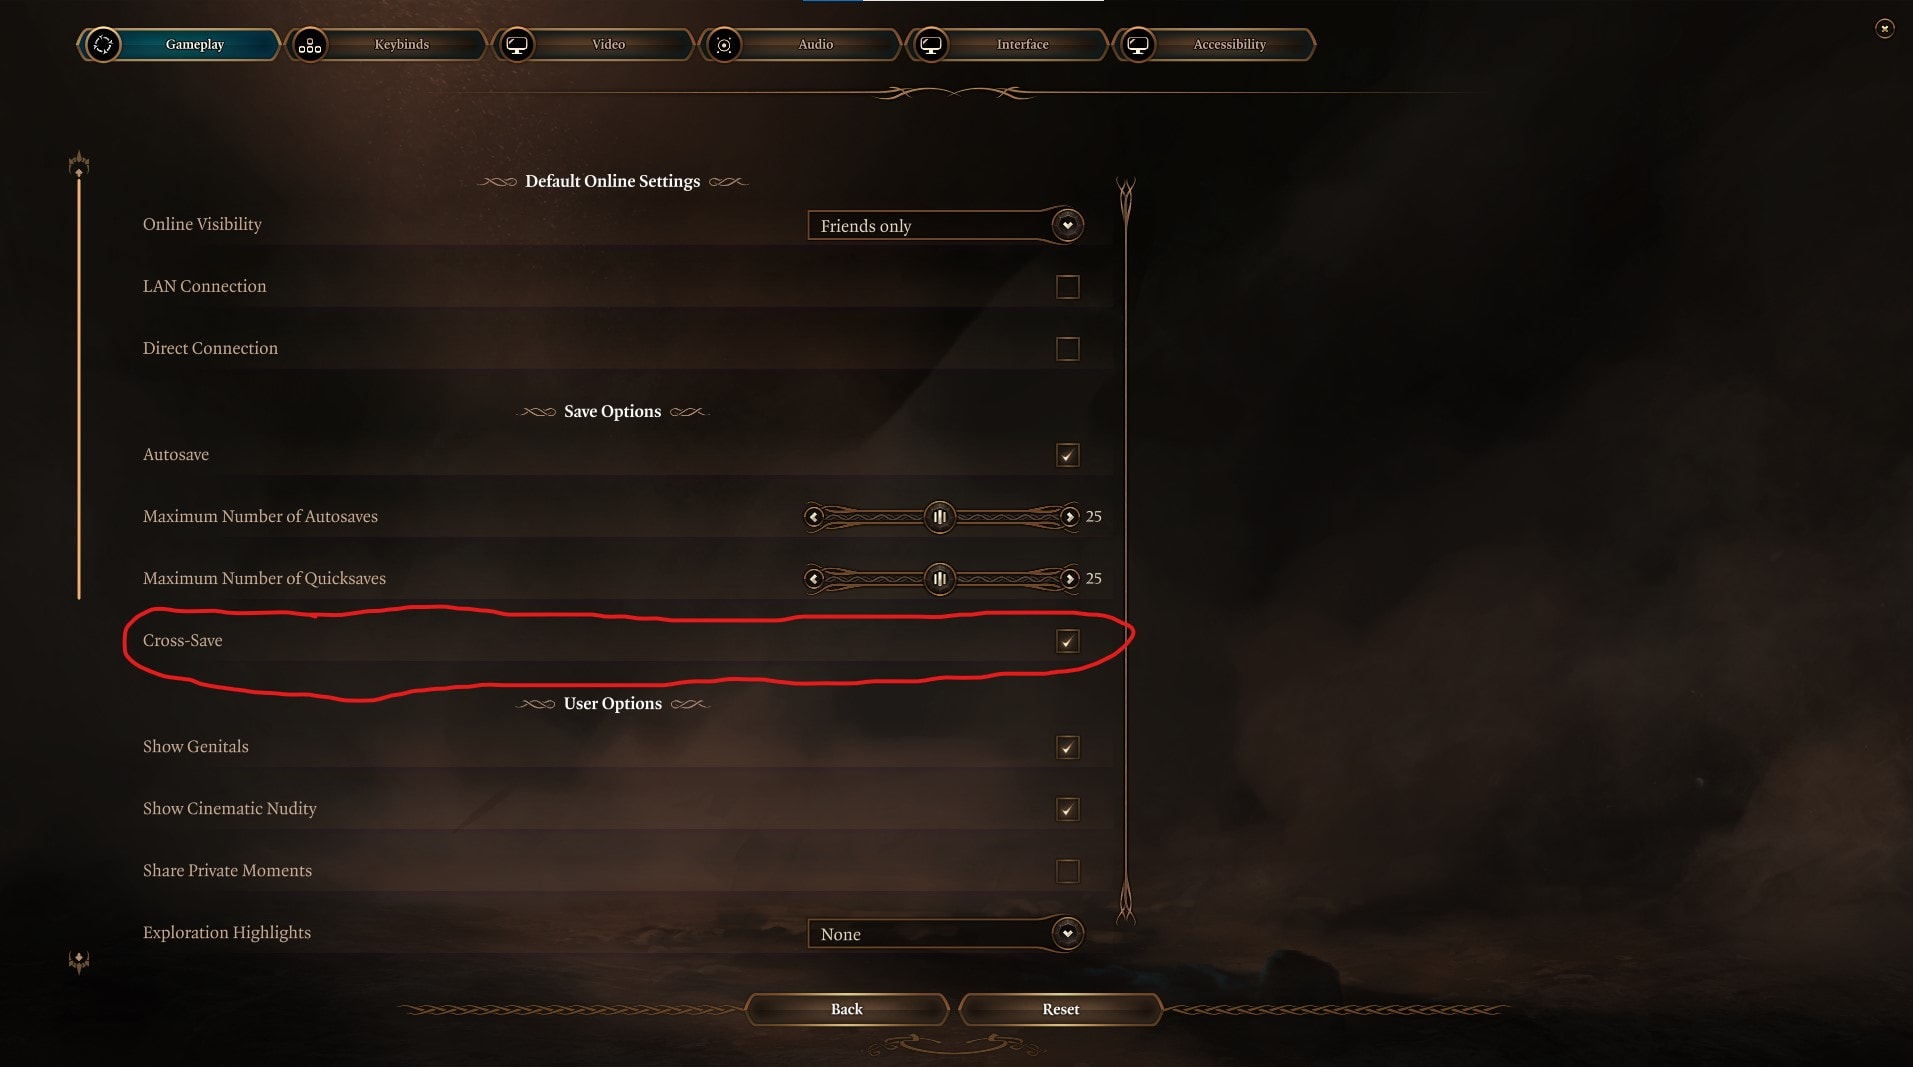 Screenshot of the Baldur's Gate 3 options settings with the cross save option circled in red and checked off